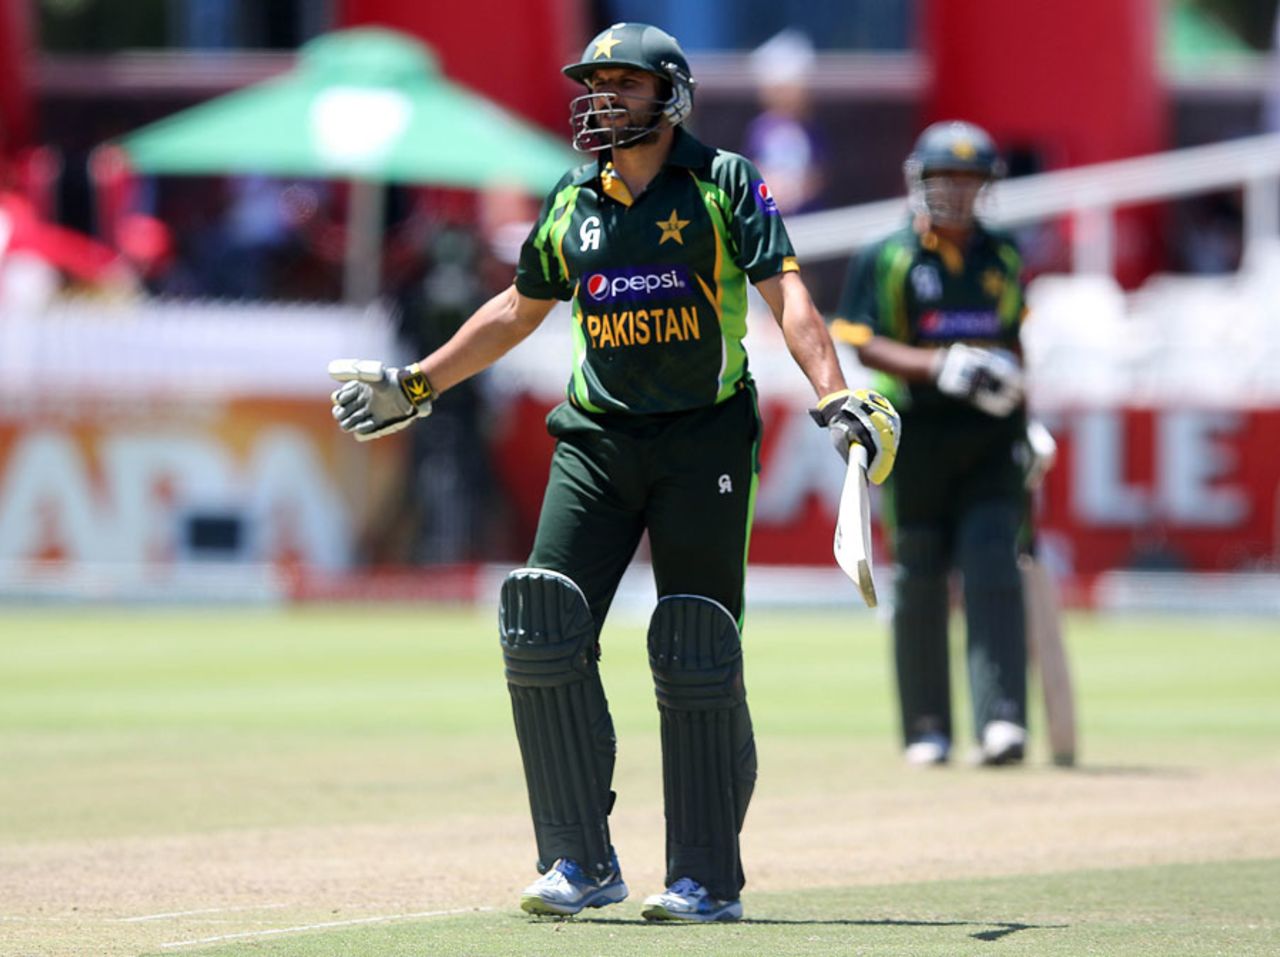 Shahid Afridi is dismayed after losing his wicket, South Africa v Pakistan, 1st ODI, Cape Town, November 24, 2013